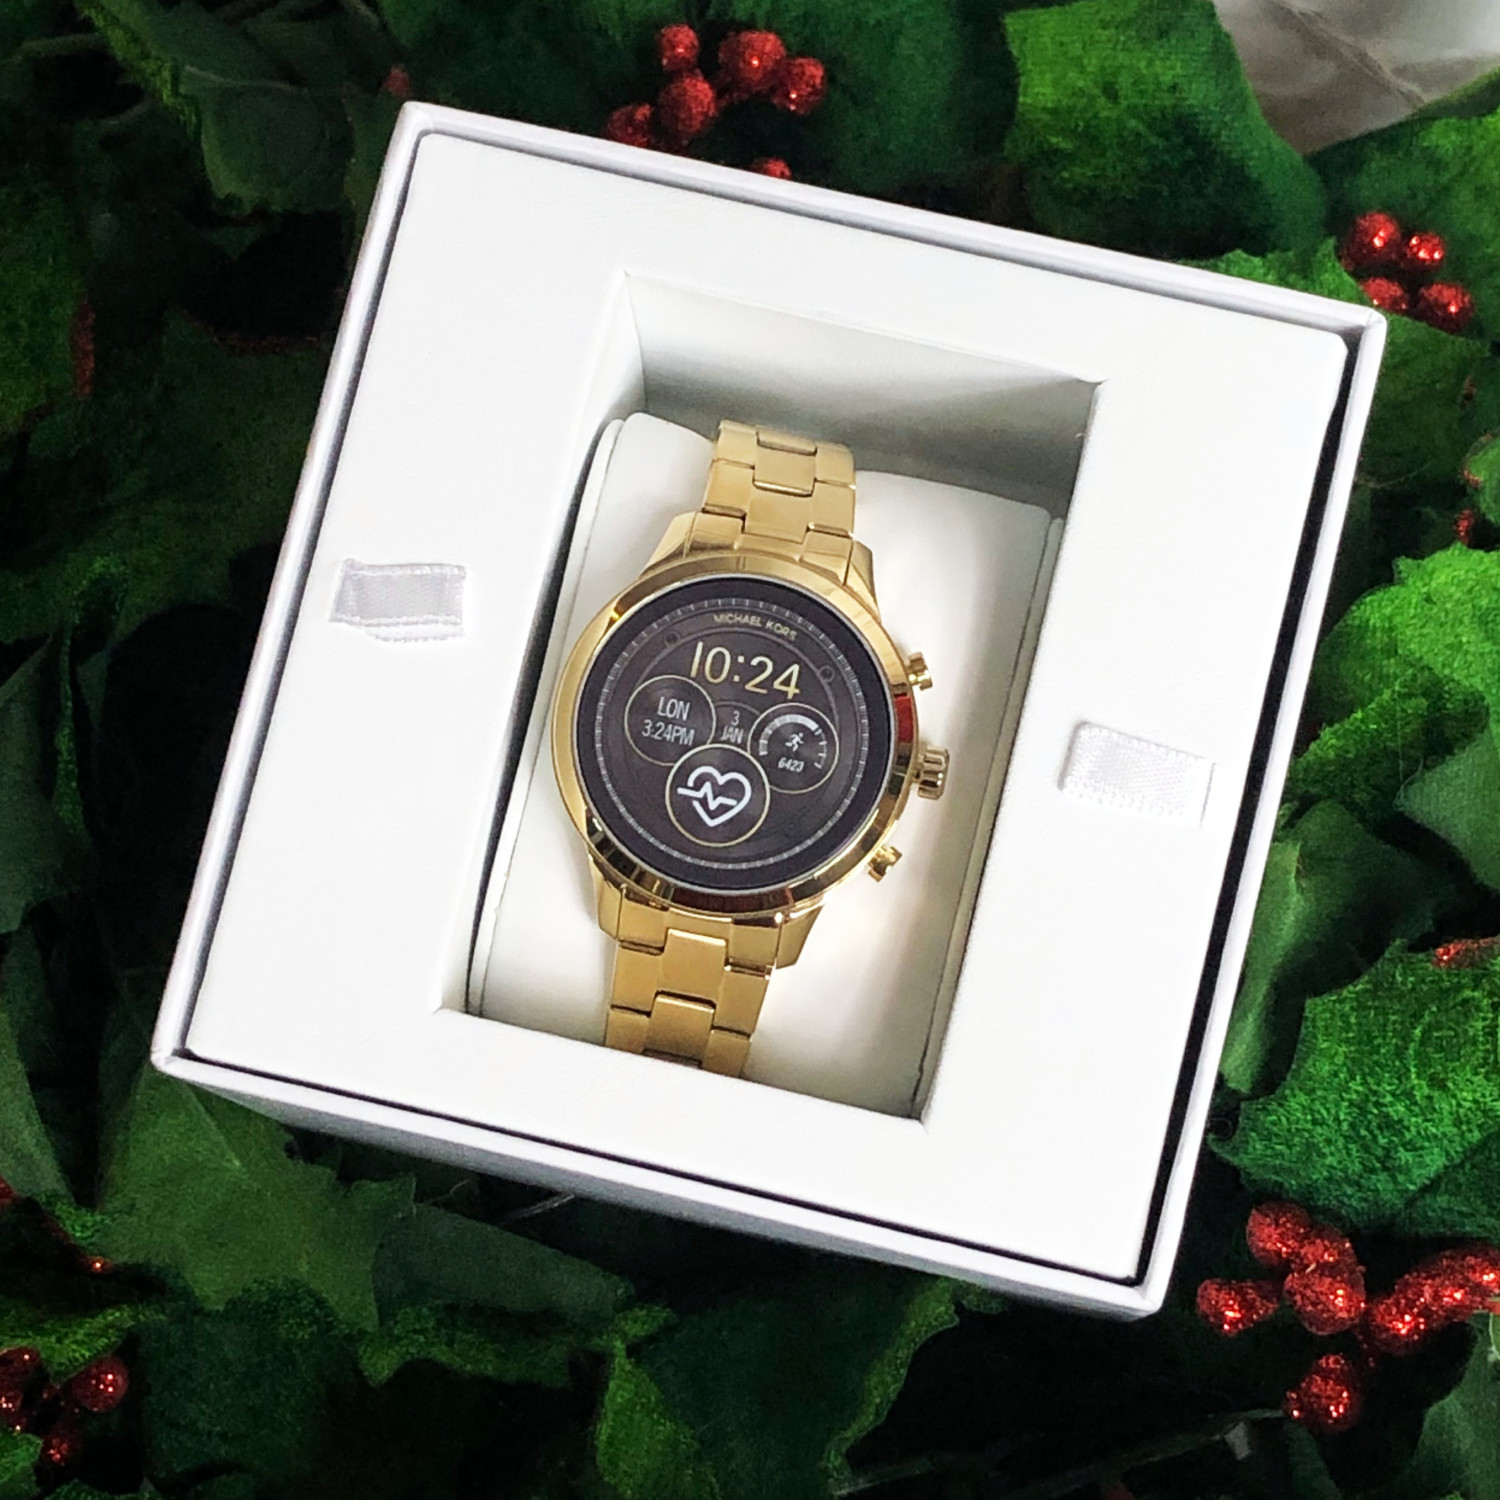 De Dios aceptable saldar The Michael Kors Access Runway Smartwatch for iOS and Android - Life She Has